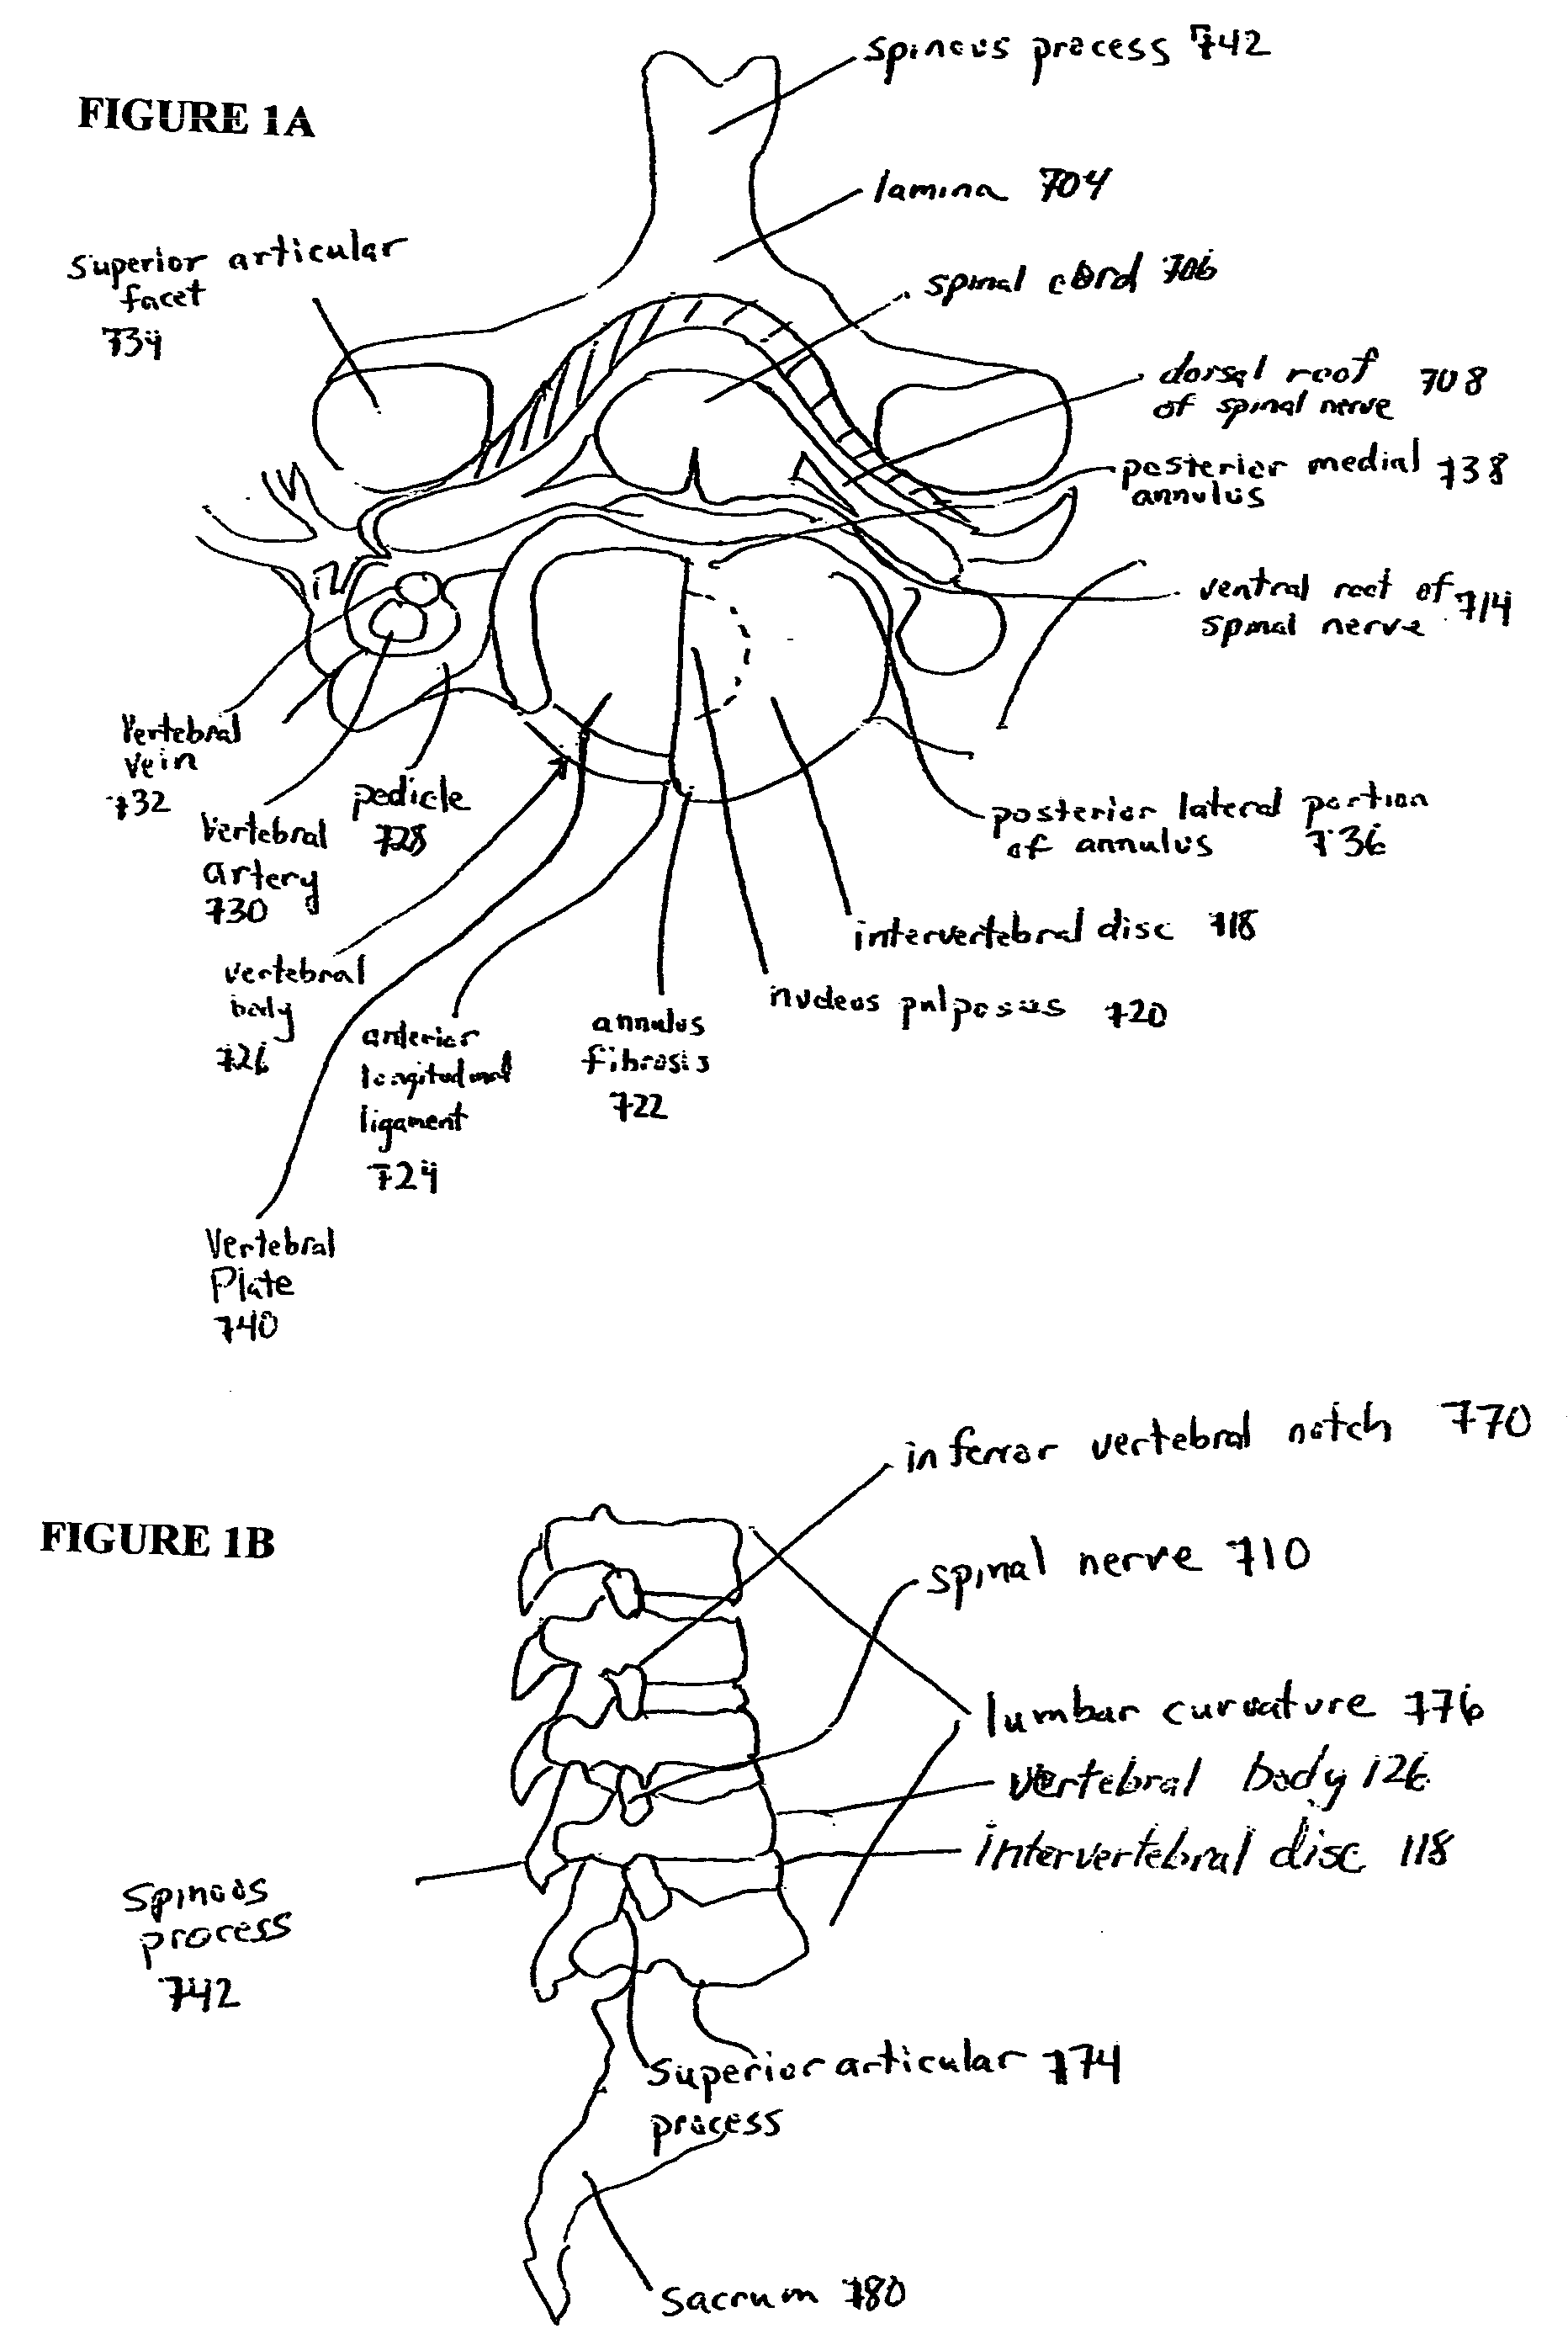 Devices and methods for spine repair